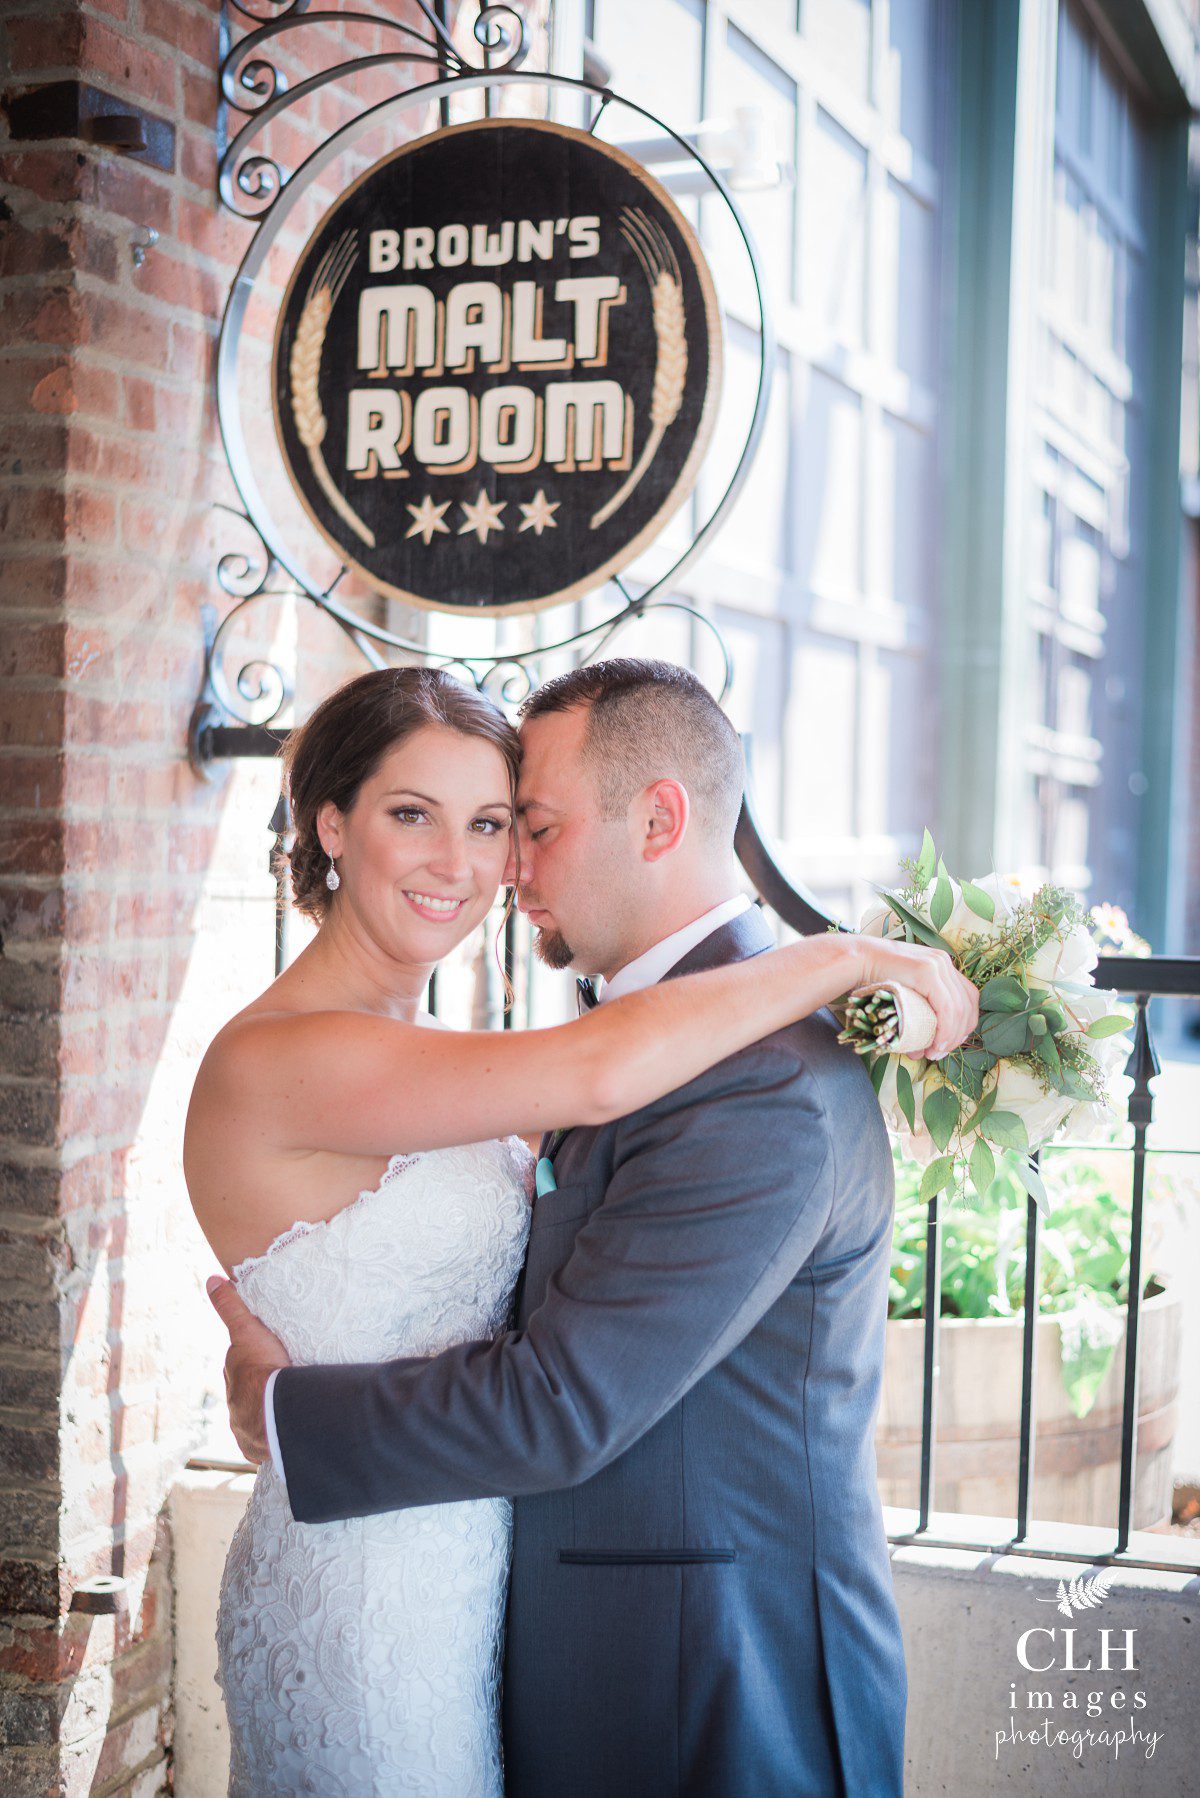 clh-images-photography-ashley-and-rob-day-wedding-revolution-hall-wedding-troy-ny-wedding-photography-86